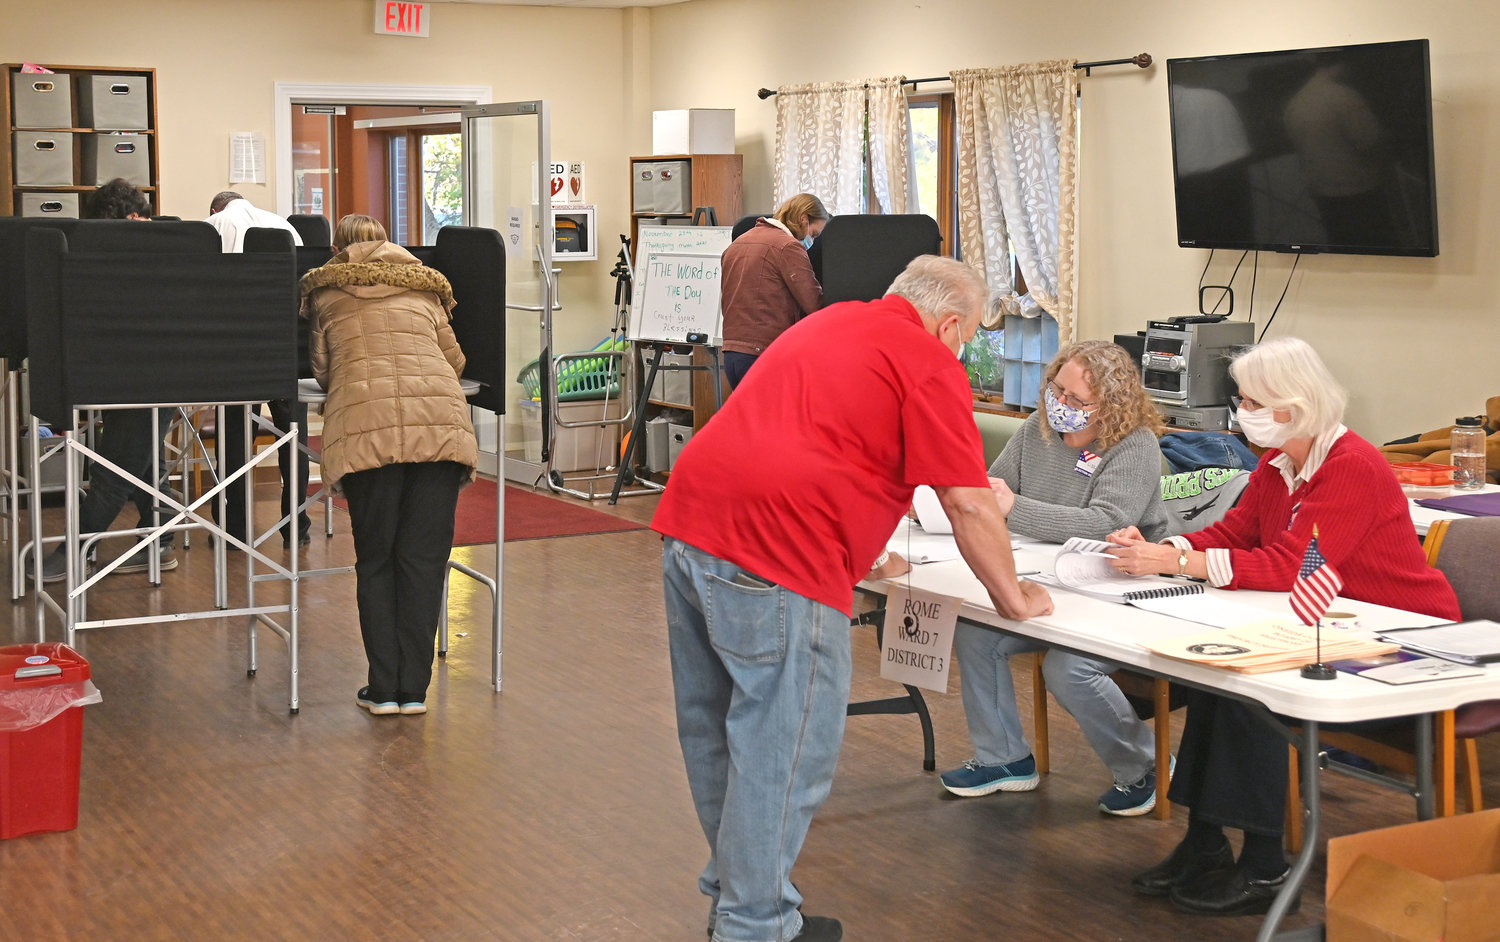 BUSTLING — The voting was brisk at the Copper  City Community Connection, 305 E. Locust St., with a steady stream of voters casting their ballots on local races as well as several statewide propositions which were also on the ballot.